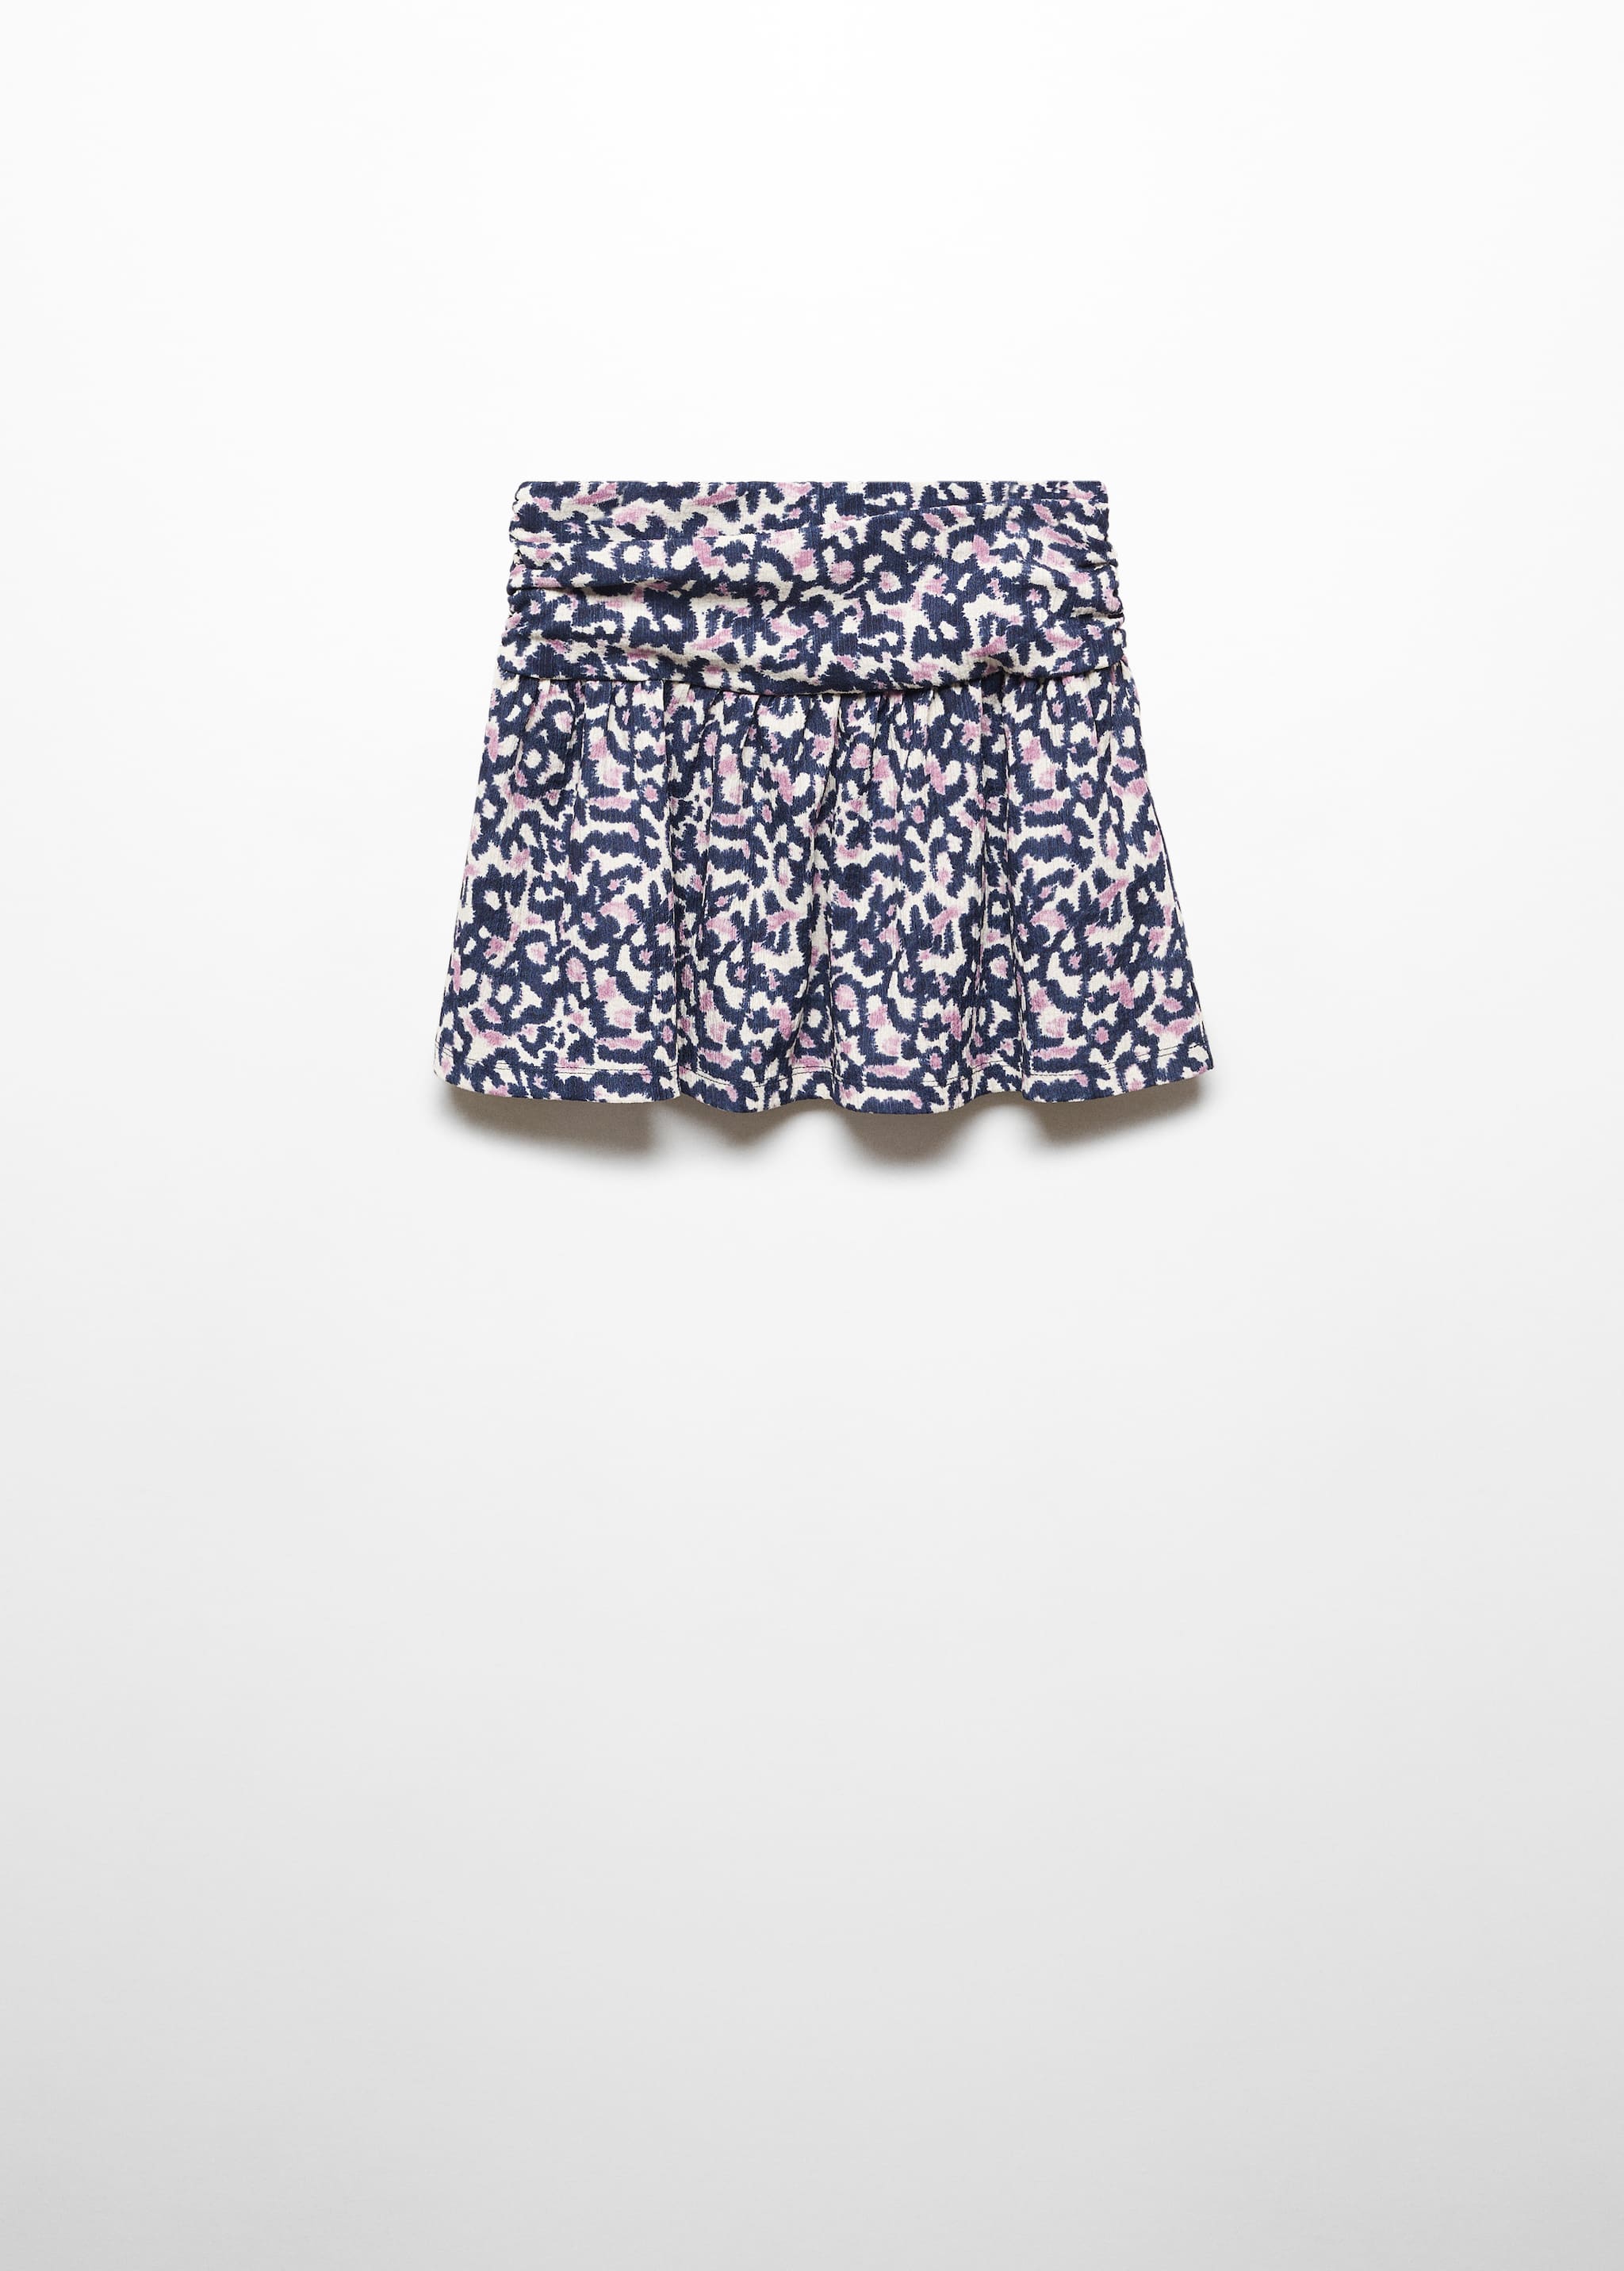 Printed skirt - Article without model